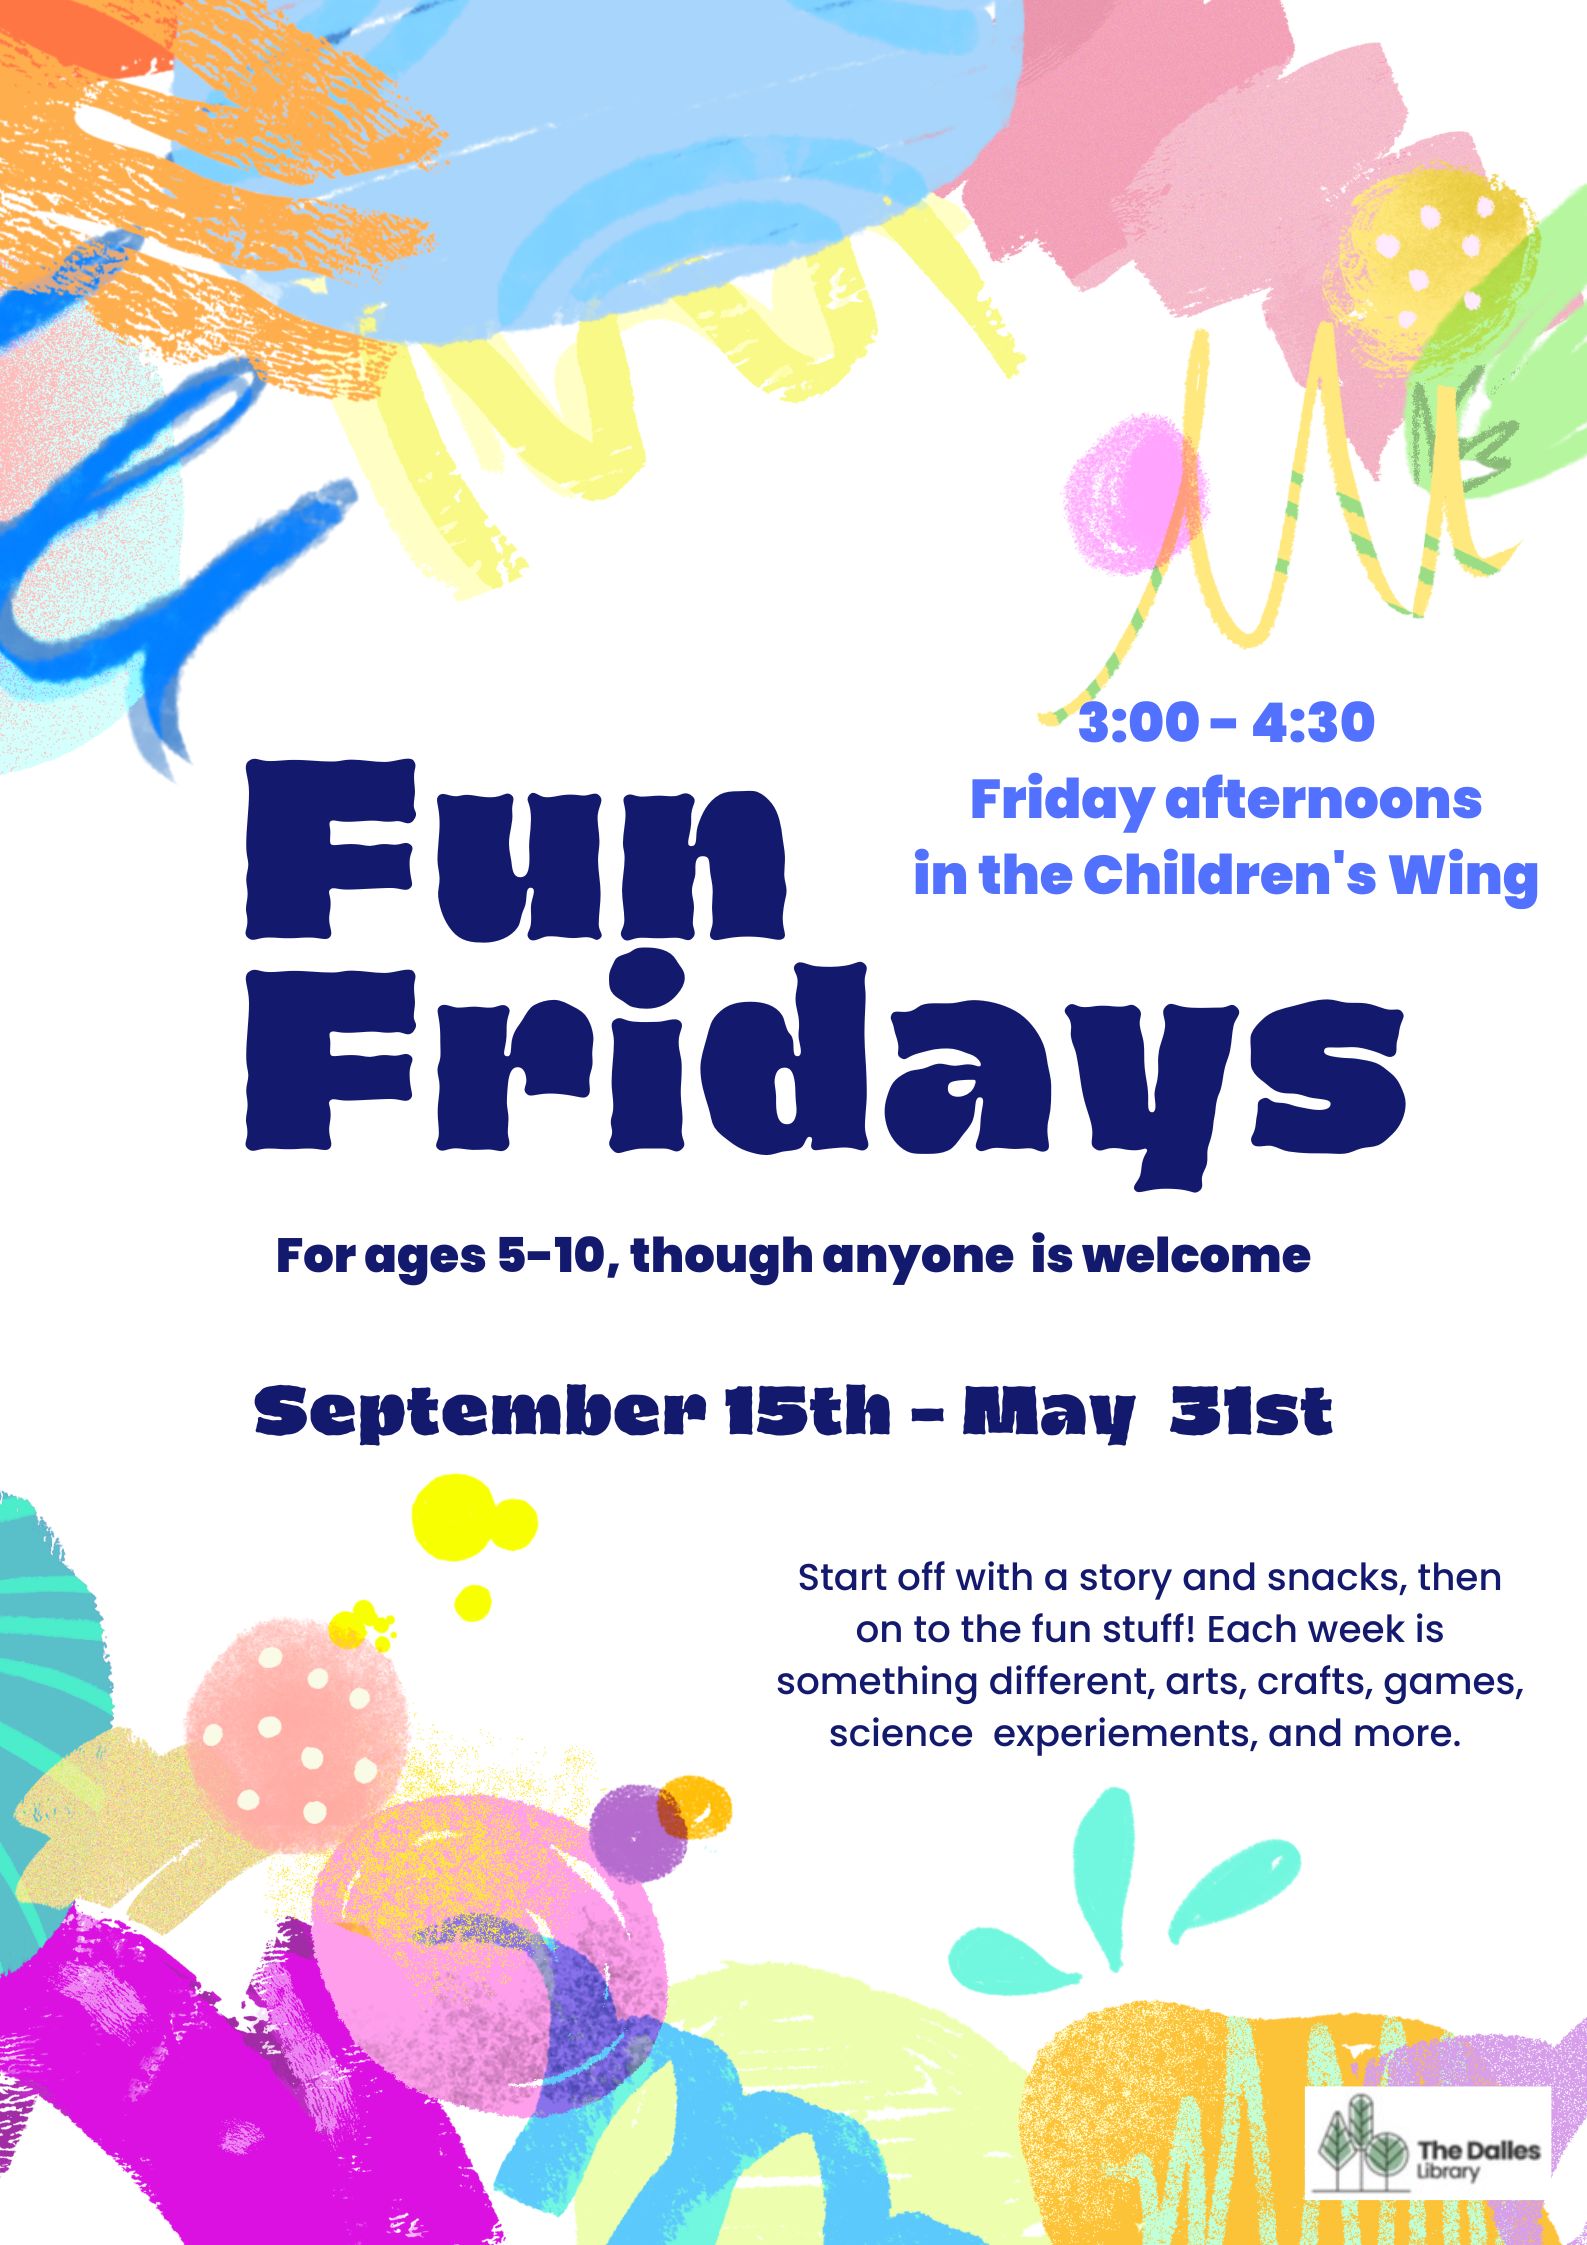 Fun Fridays are every Saturday from September 15th through May 31st